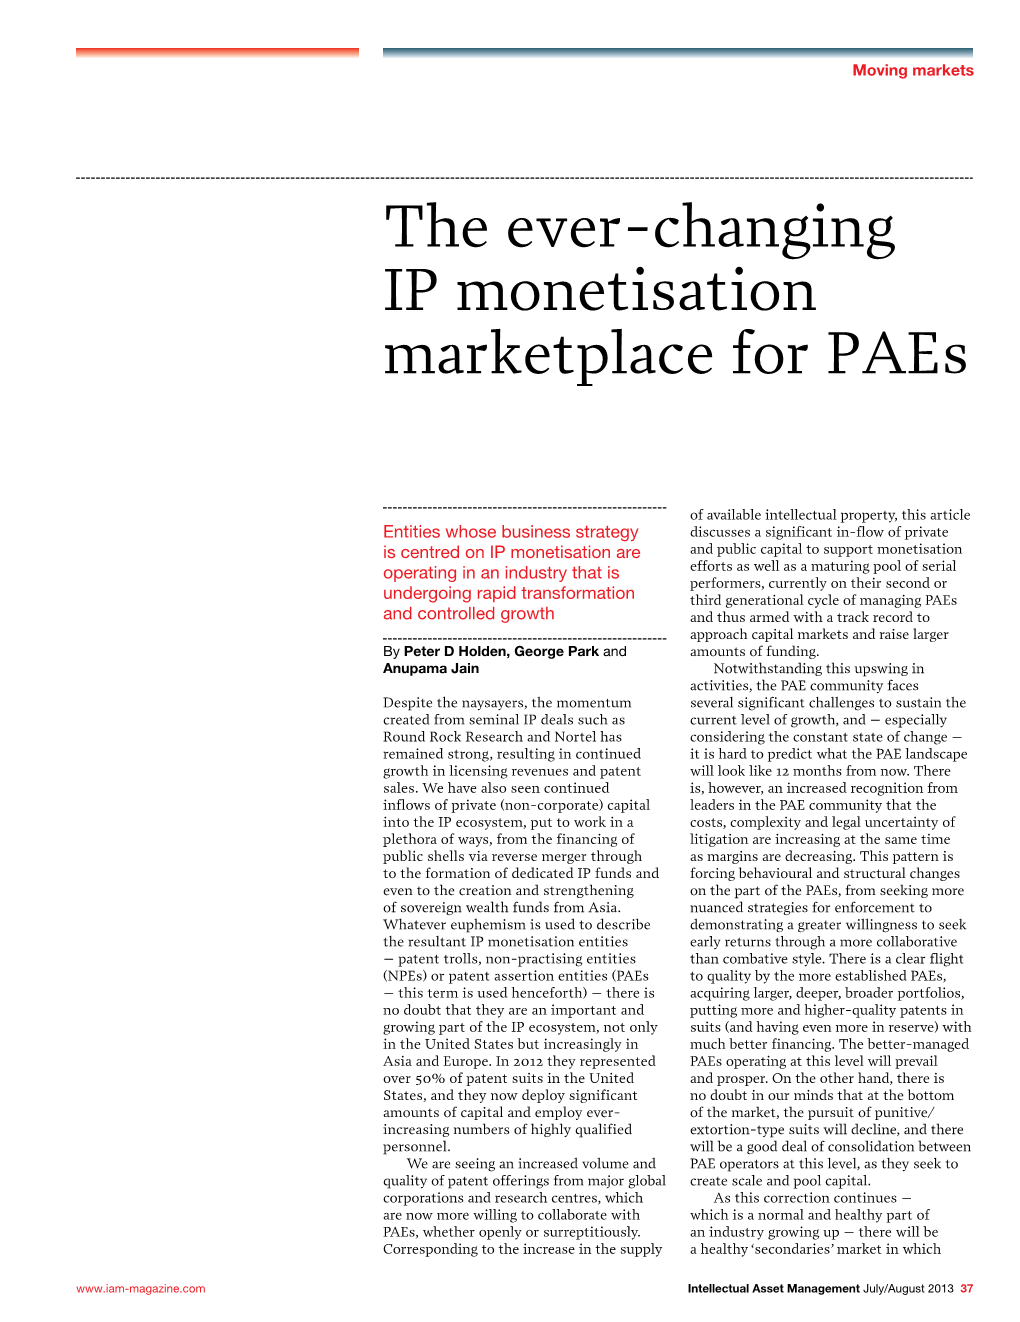 The Ever-Changing IP Monetisation Marketplace for Paes